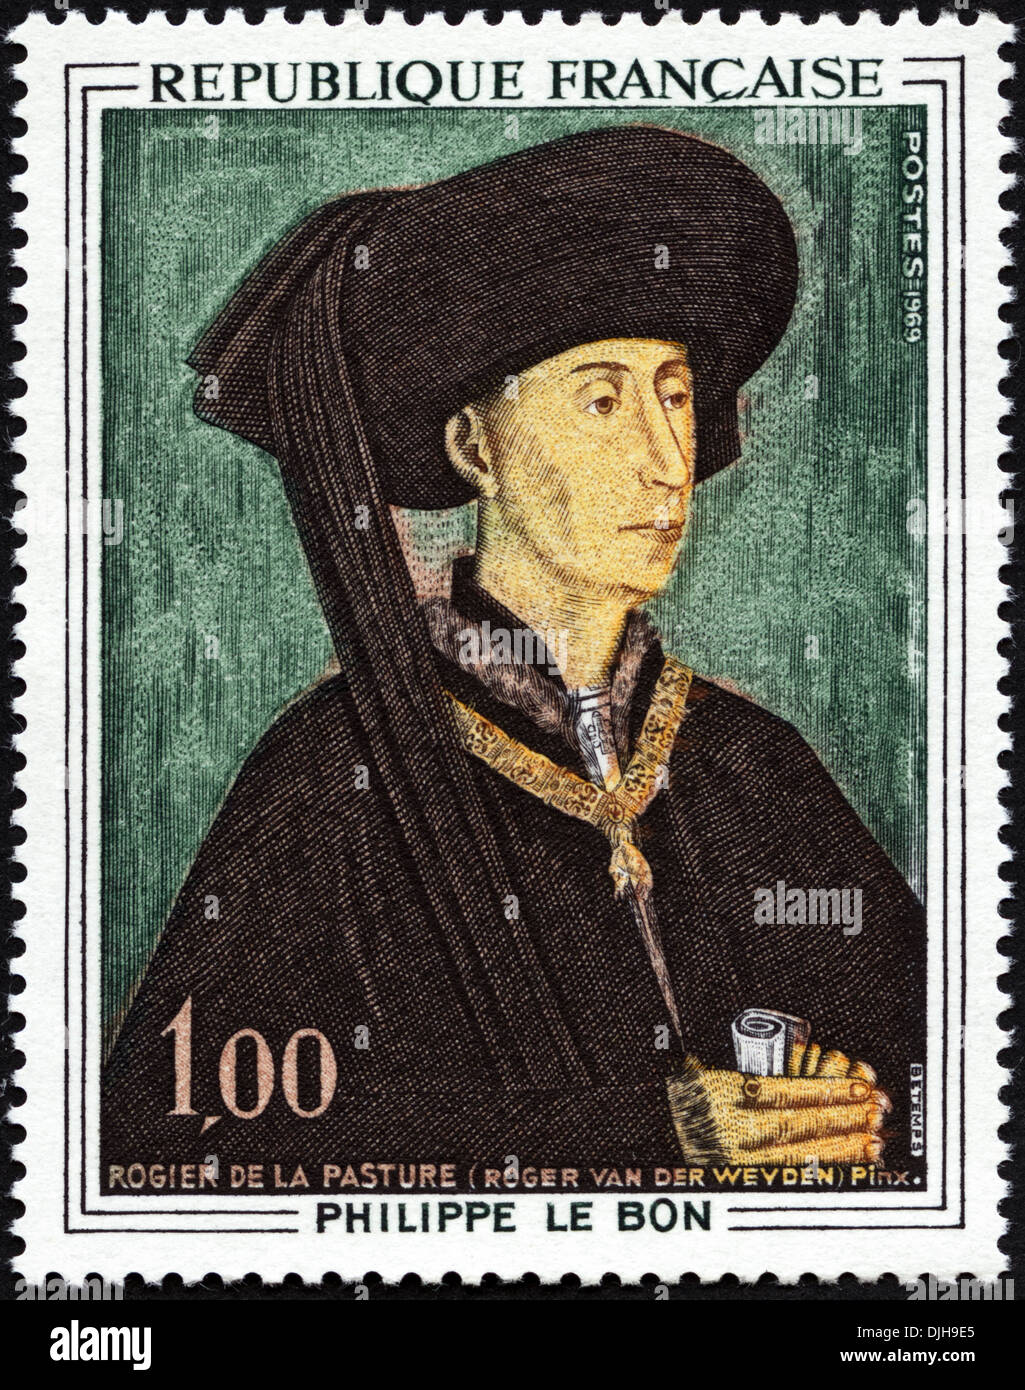 postage stamp Republic of France featuring painting of Philippe Le Bon Duke of Burgundy by Roger Van Der Weyden issued 1969 Stock Photo